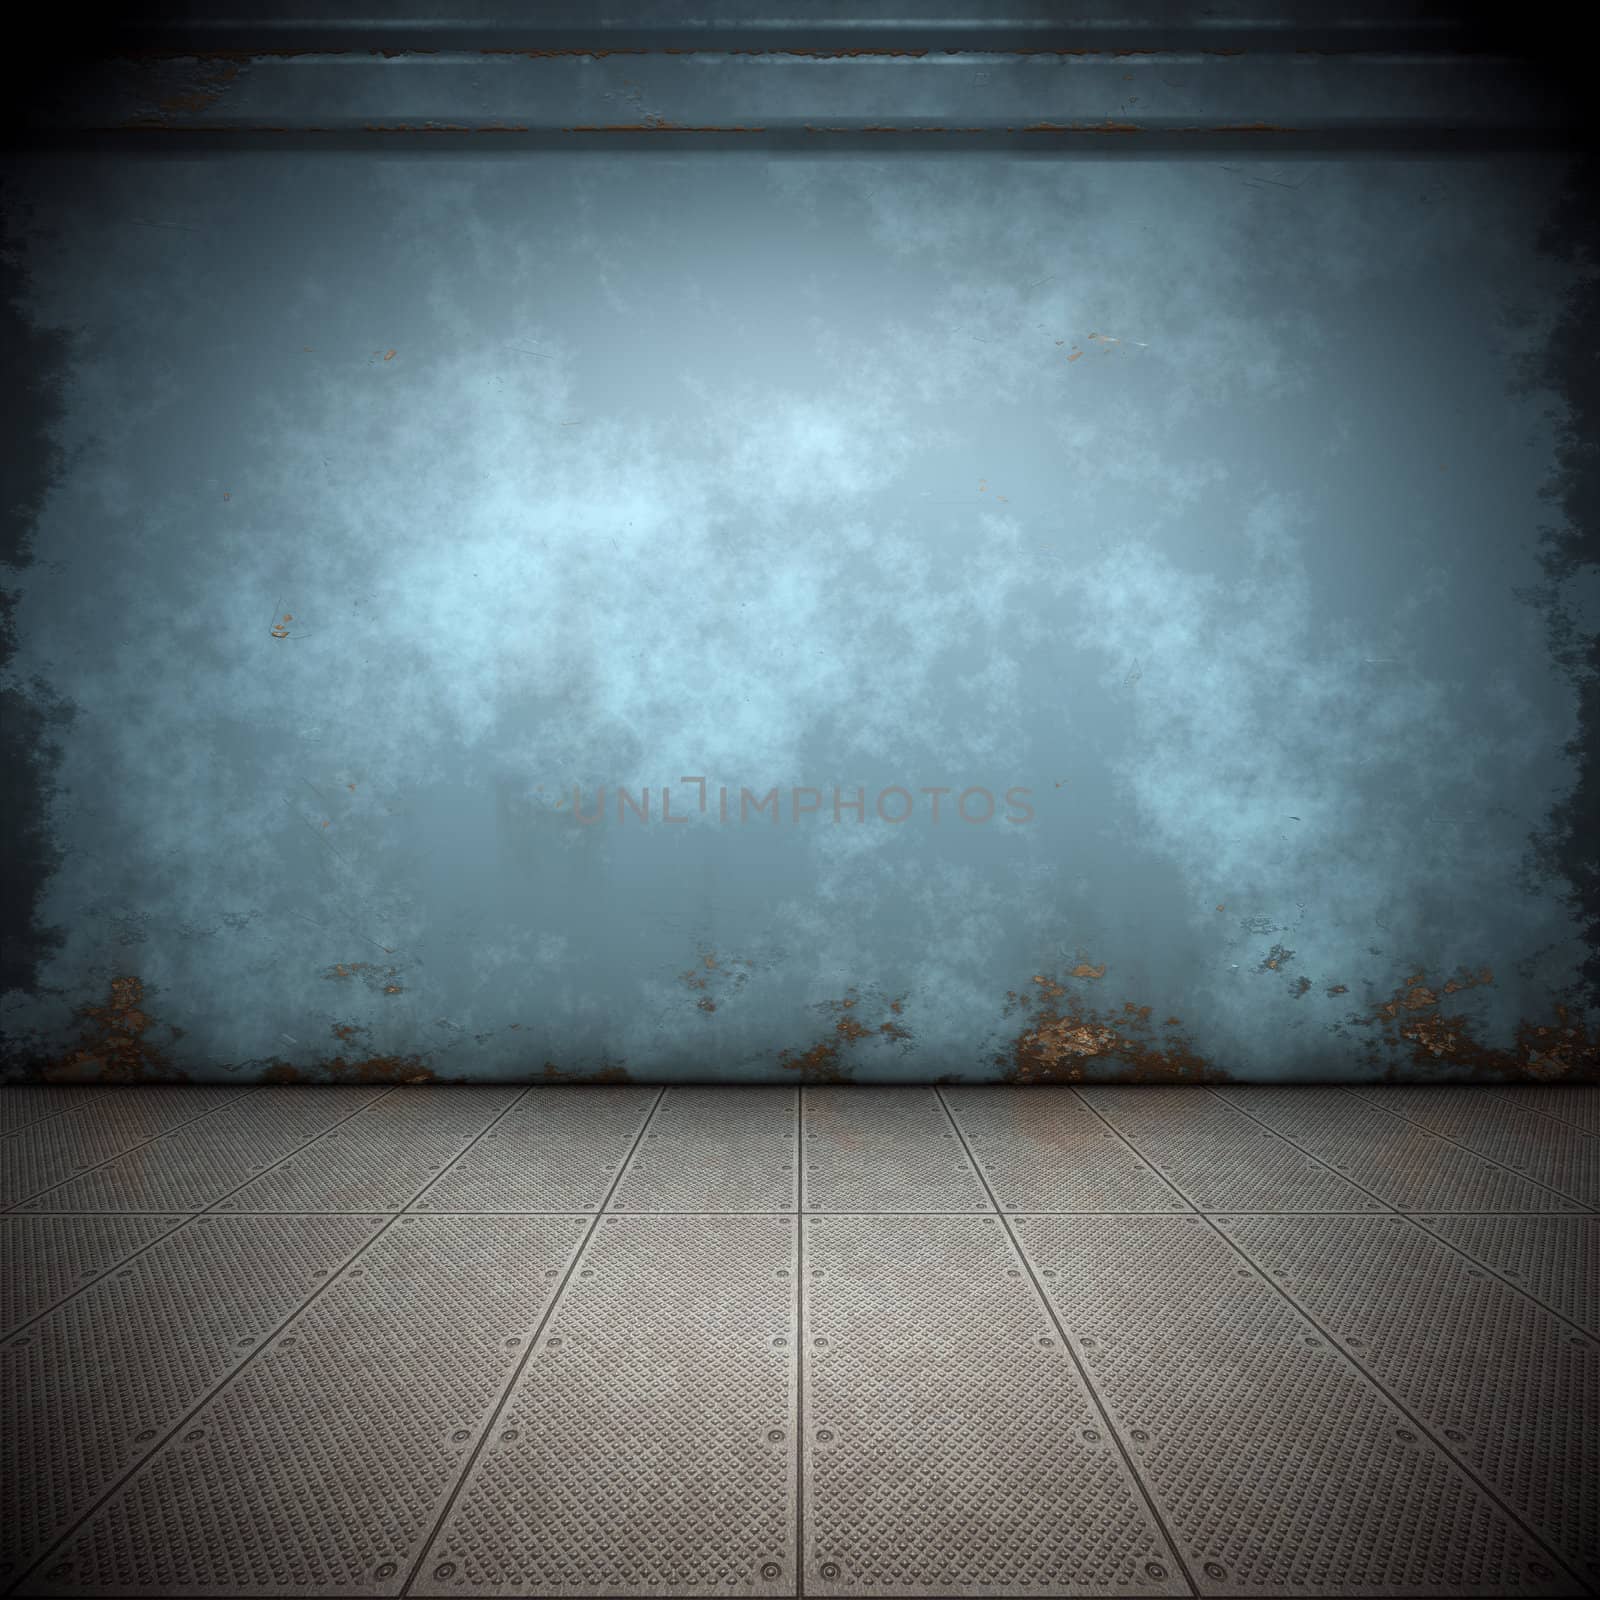 An image of a nice steel floor background